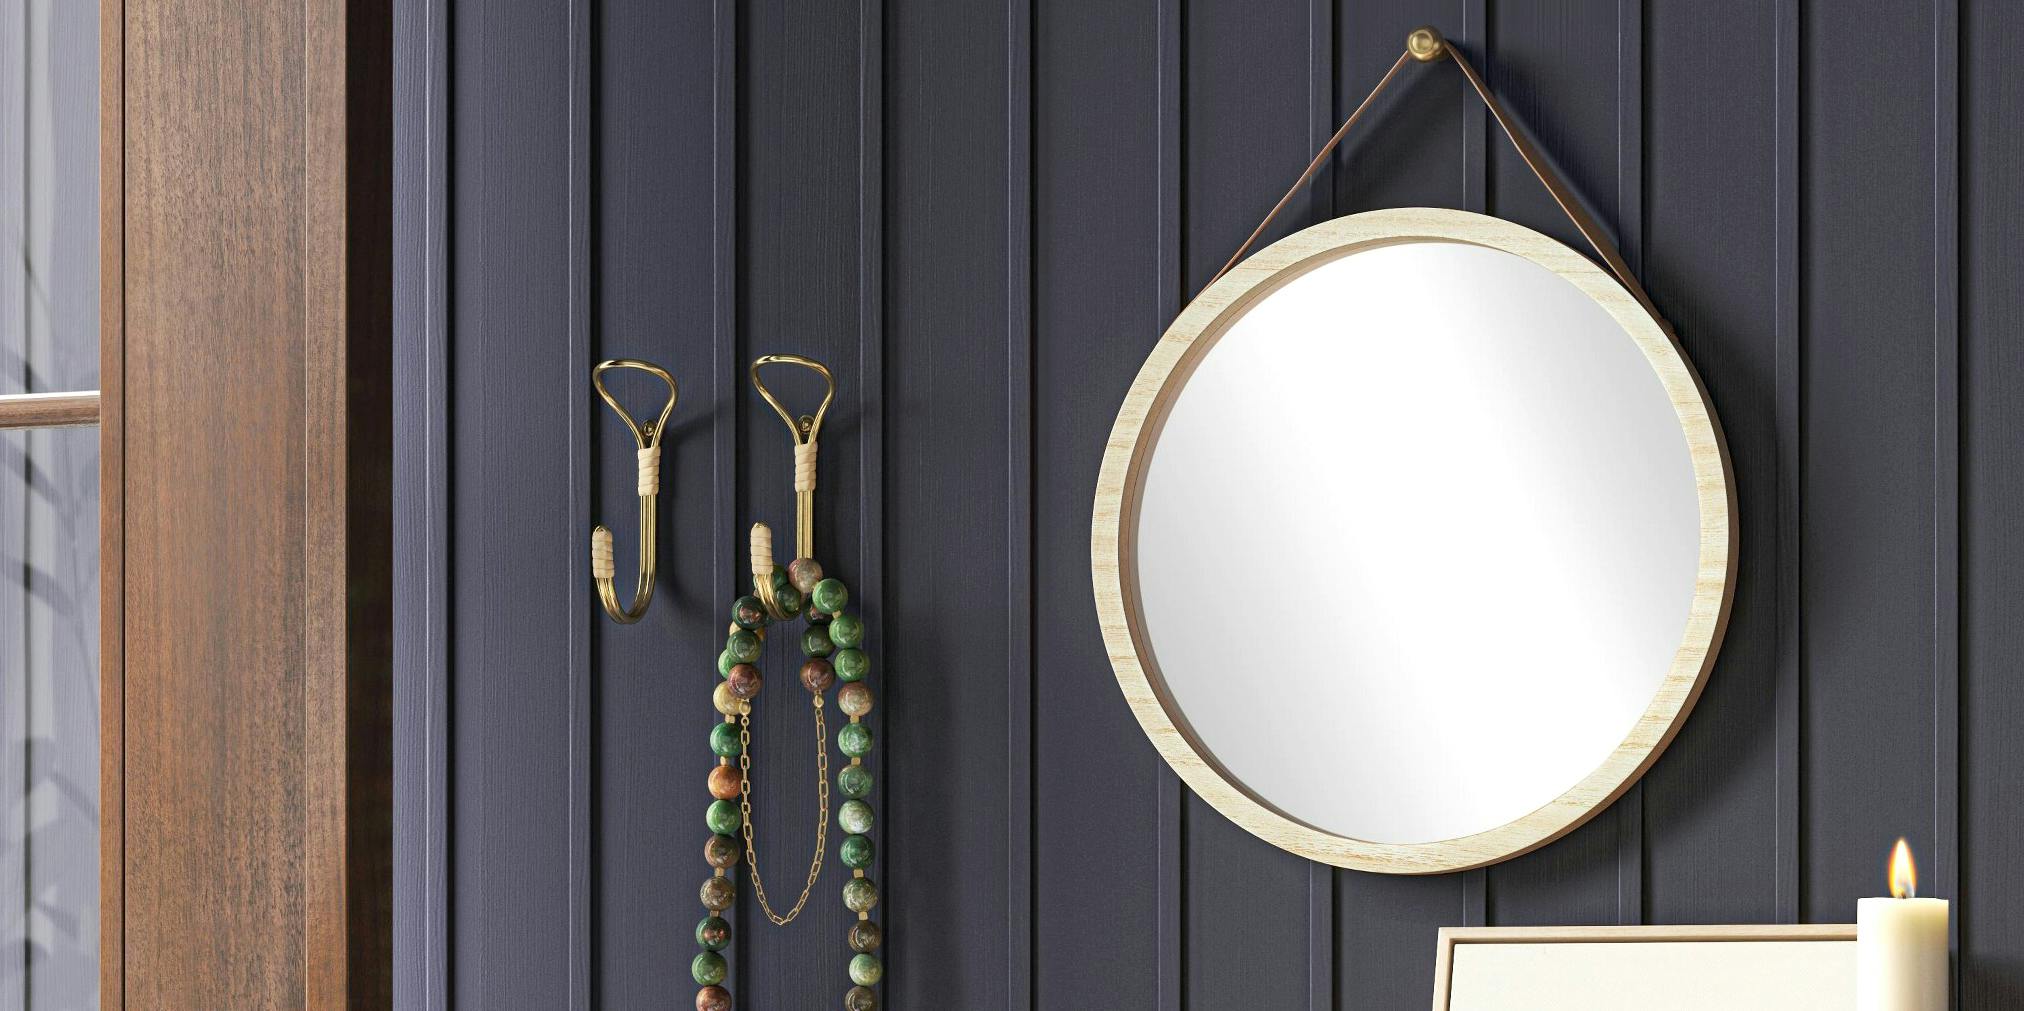 Target's $10 Threshold Hanging Mirror Is Selling Out — But Available for Shipping